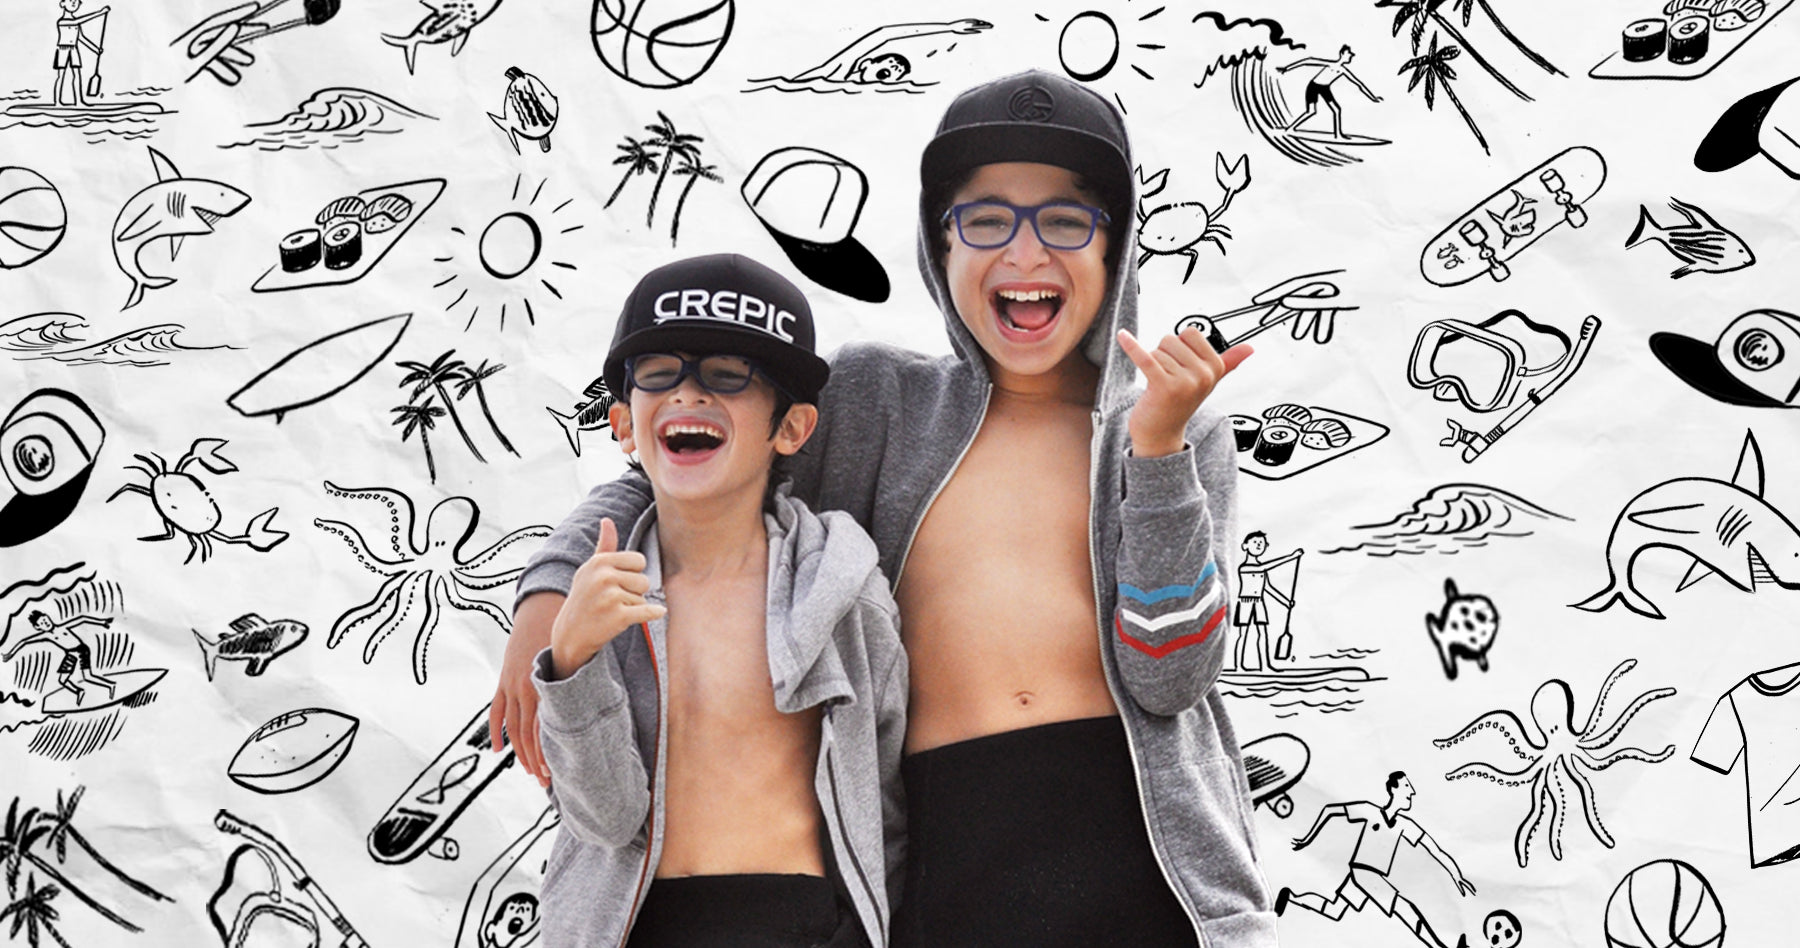 Portrait of Ethan and Merritt Perlyn, the young founders of Crepic. Surrounding them are illustrations that reflect their business, hobbies and dreams.